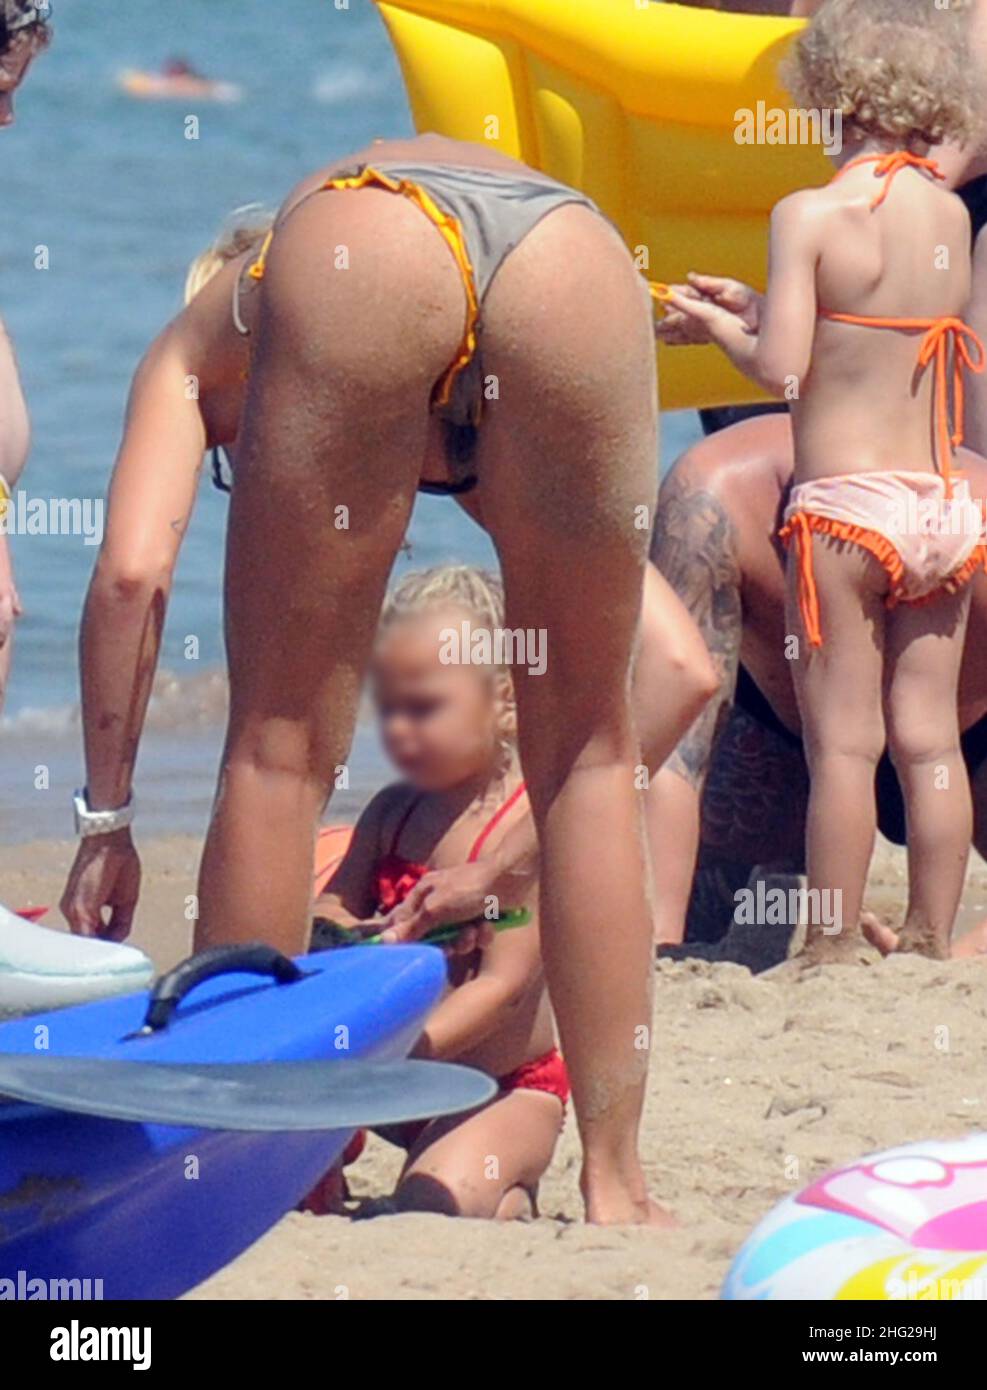 Ilary Blasi, wife of soccer player Francesco Totti, relaxing on the beach with her kids Cristian and Chanel (faces blurred) in the coastal town Sabaudia in Lazio, Italy. Stock Photo